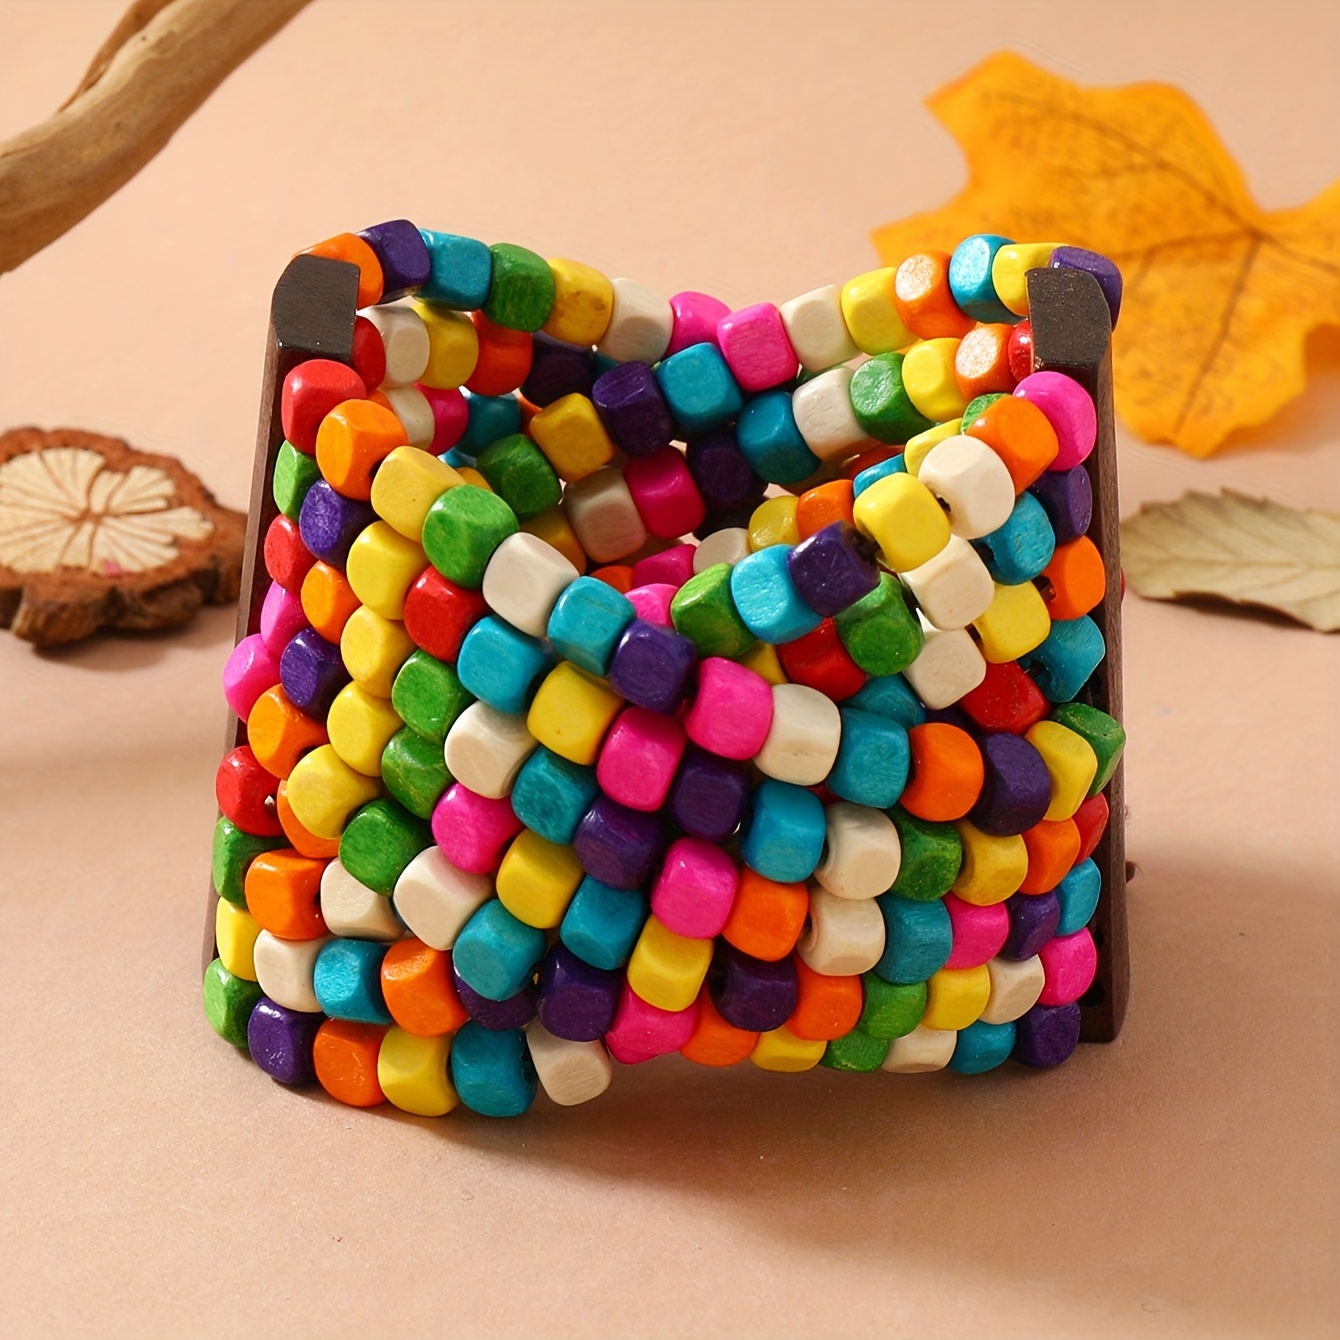 

Bohemian Vintage Wooden Bead Bracelet - Handmade Multicolor Stretch Cuff Bangle For Women, Boho Style, No Plating - Ideal For Daily And Party Occasions, All Seasons Compatible